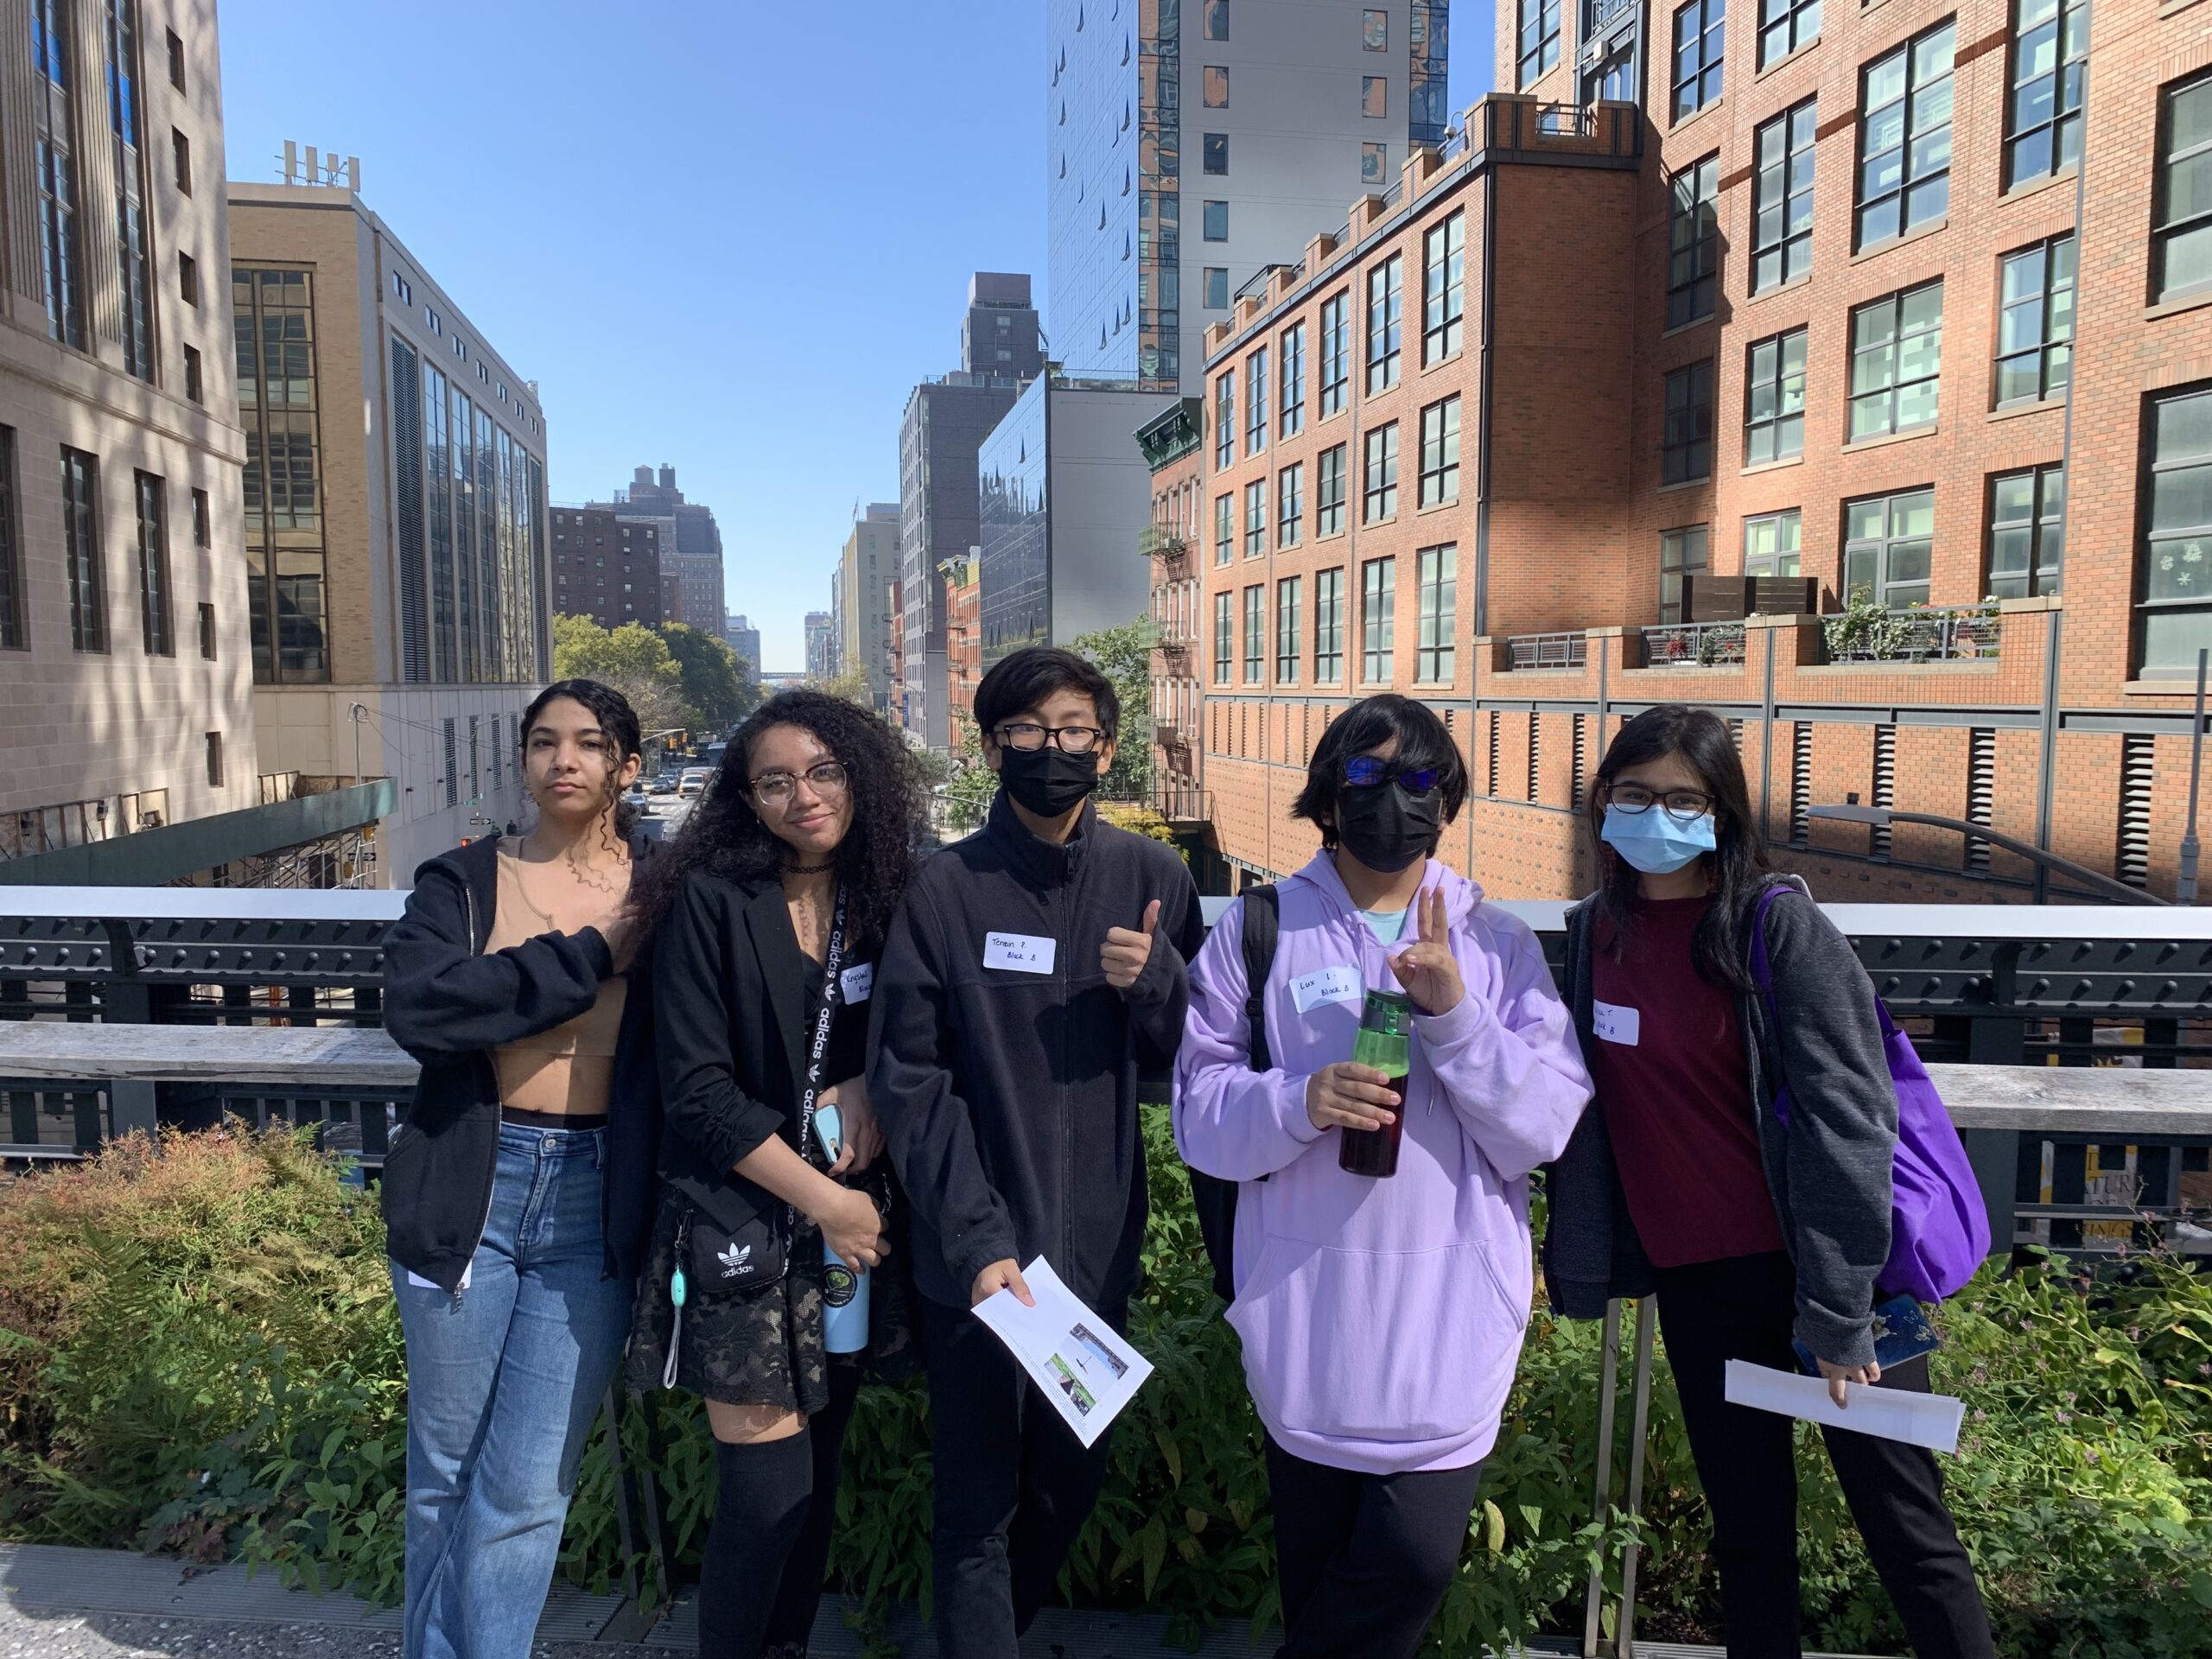 Students posing in front of an elevated view of Manhattan buildings